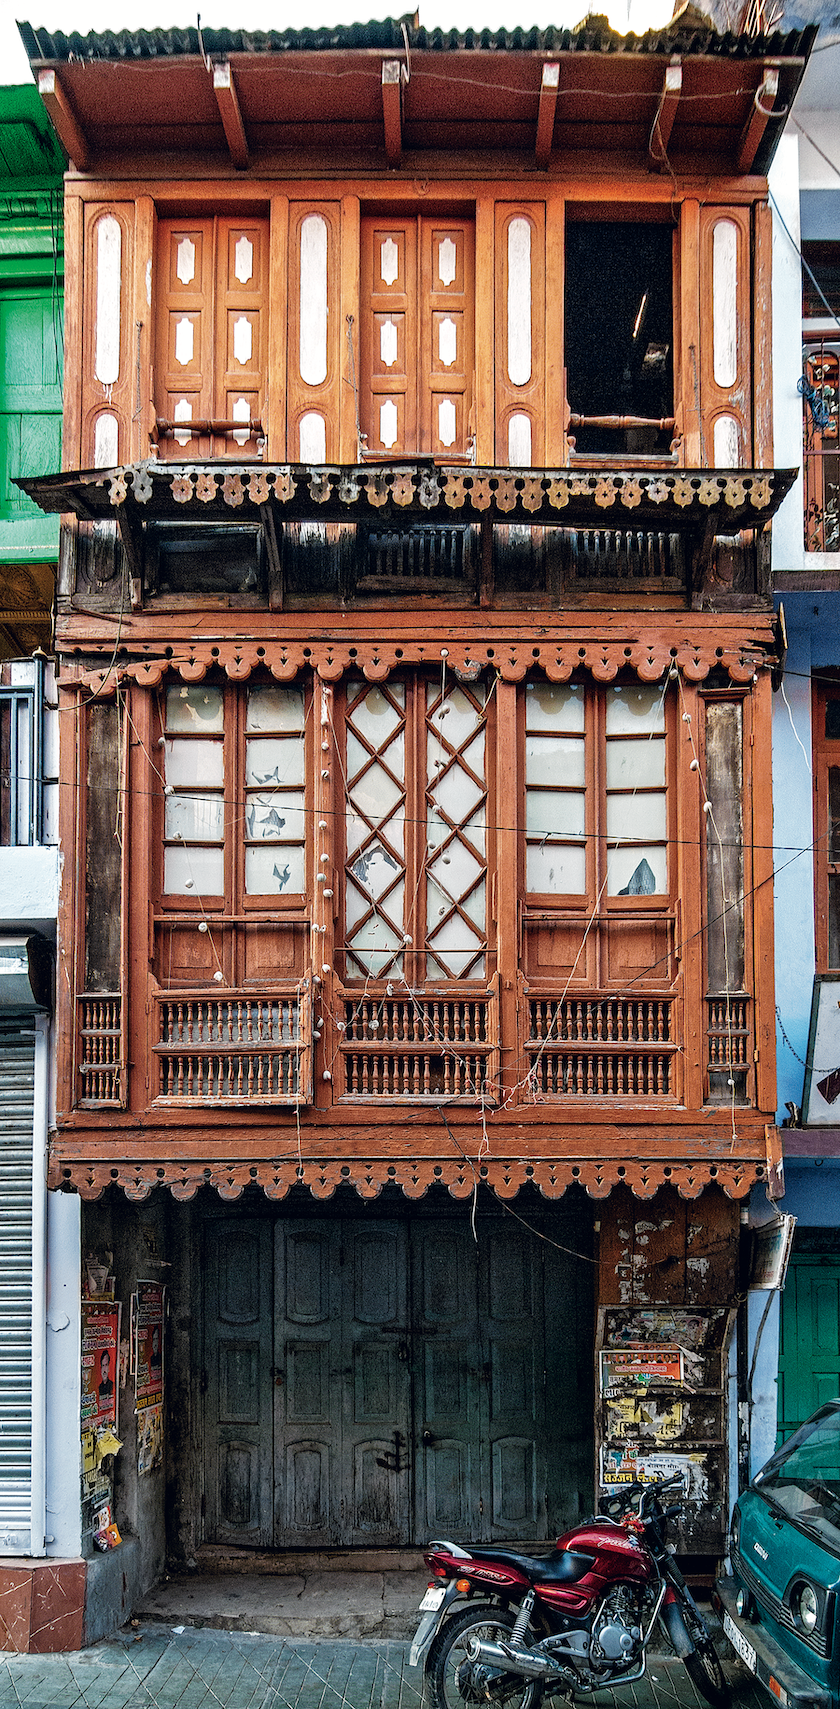 Vernacular town house structures in Almora, Uttarakhand Built shoulder-to-shoulder, these residences of traders and merchants with wooden façades are in the main bazaar with multiple windows for interaction with the street below